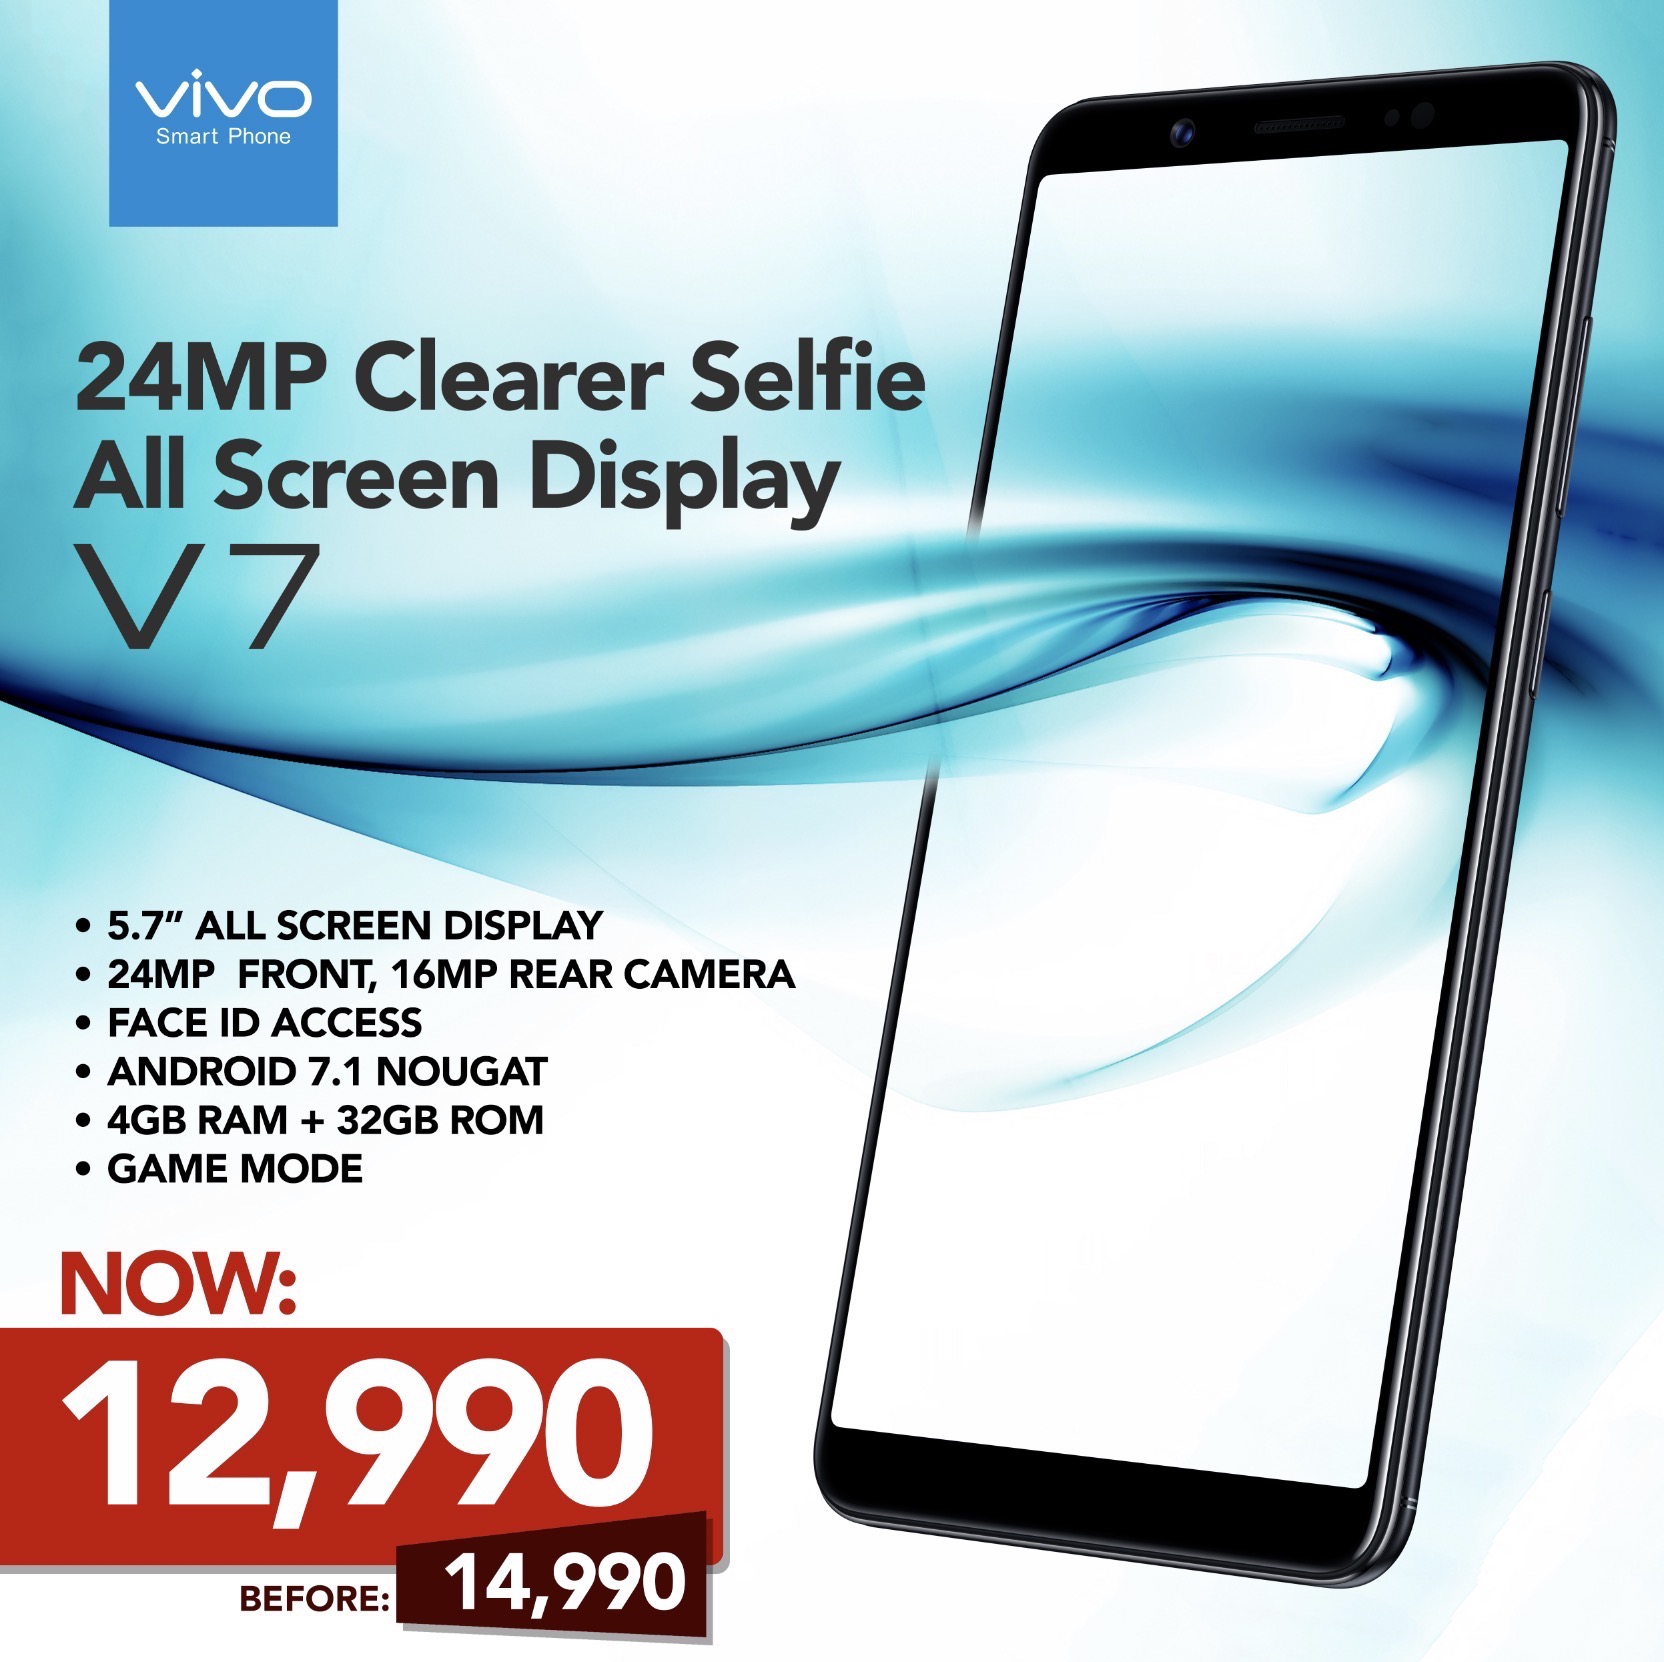 Vivo V7 24MP all screen phone now priced at Php12,990